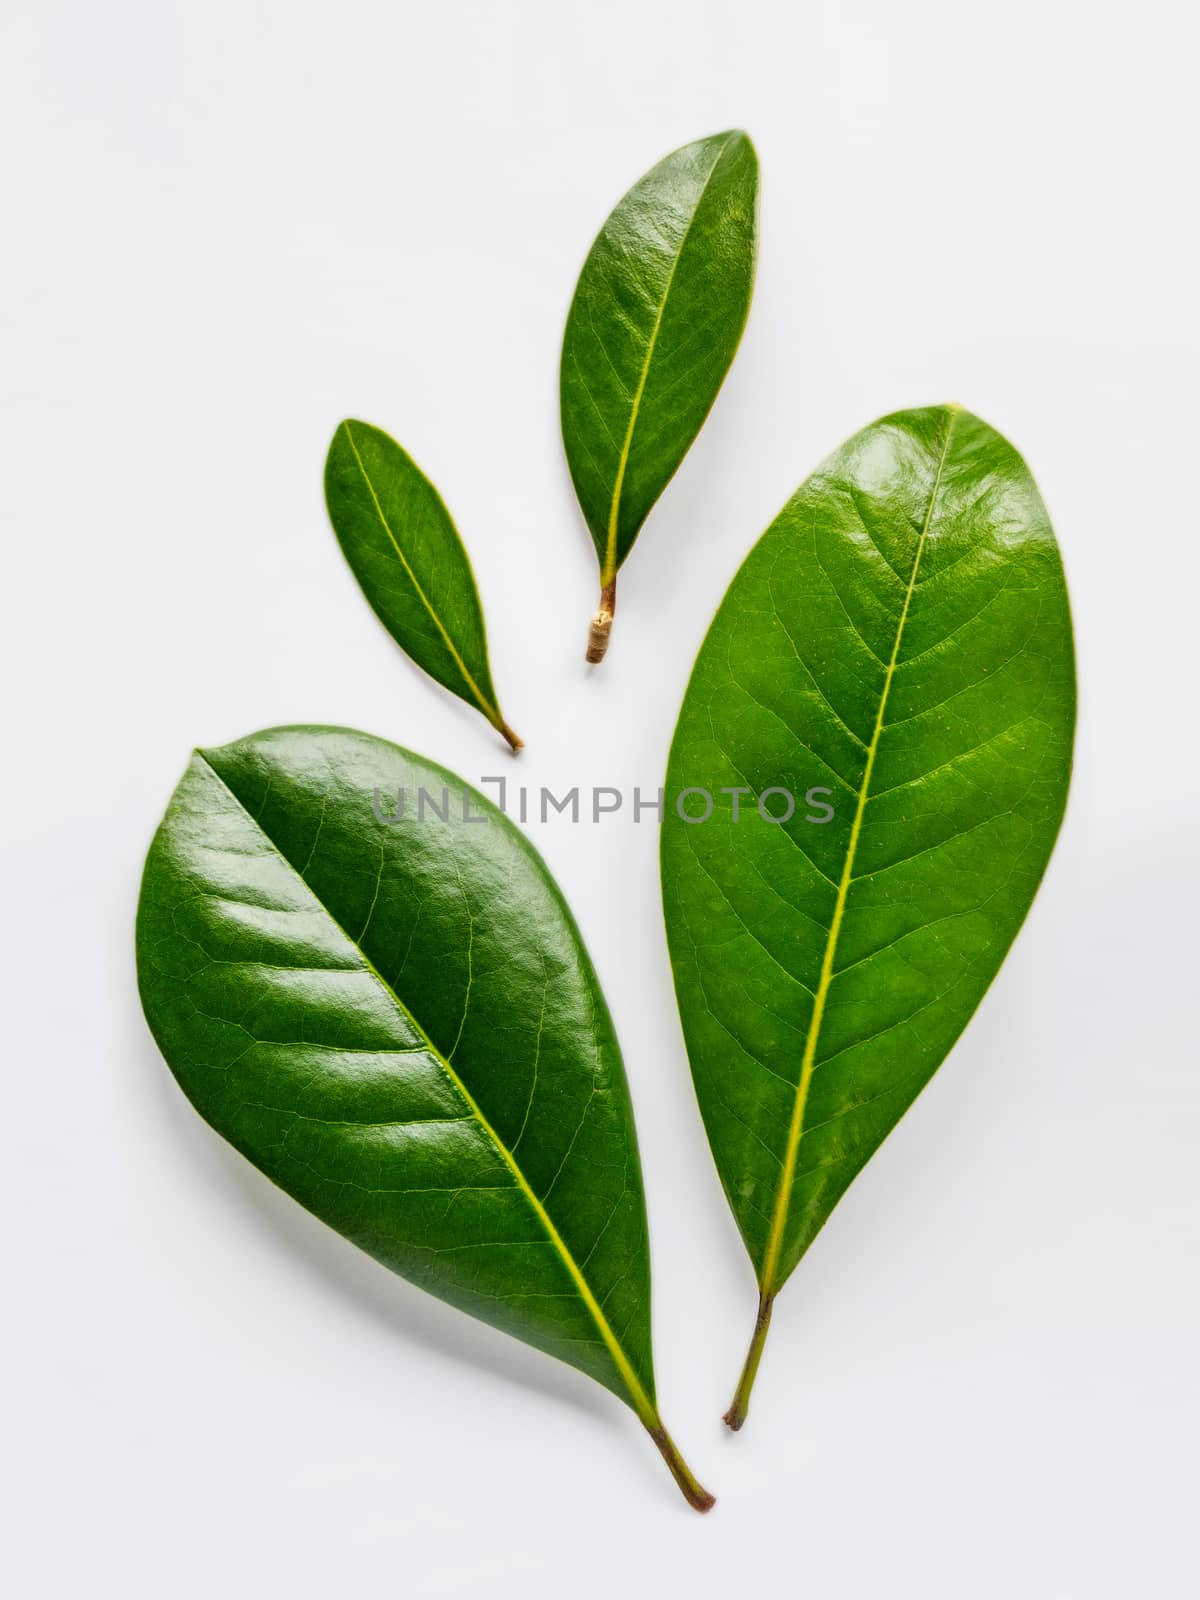 Top view on fresh green leaves on white background with copy space.